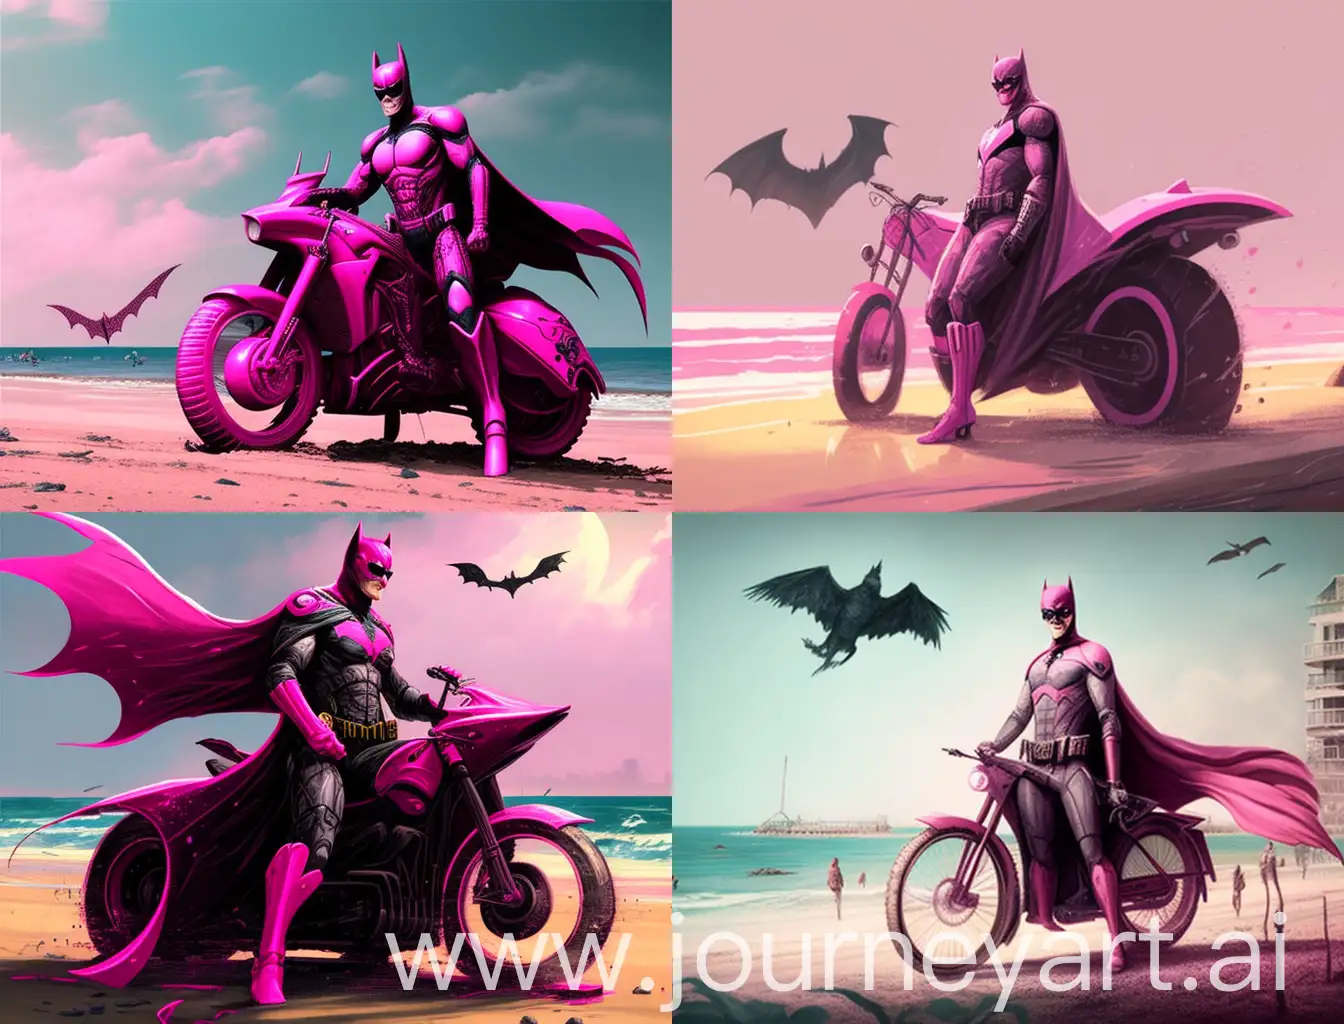 Batman-Riding-a-Bicycle-on-a-Sunny-Pink-Beach